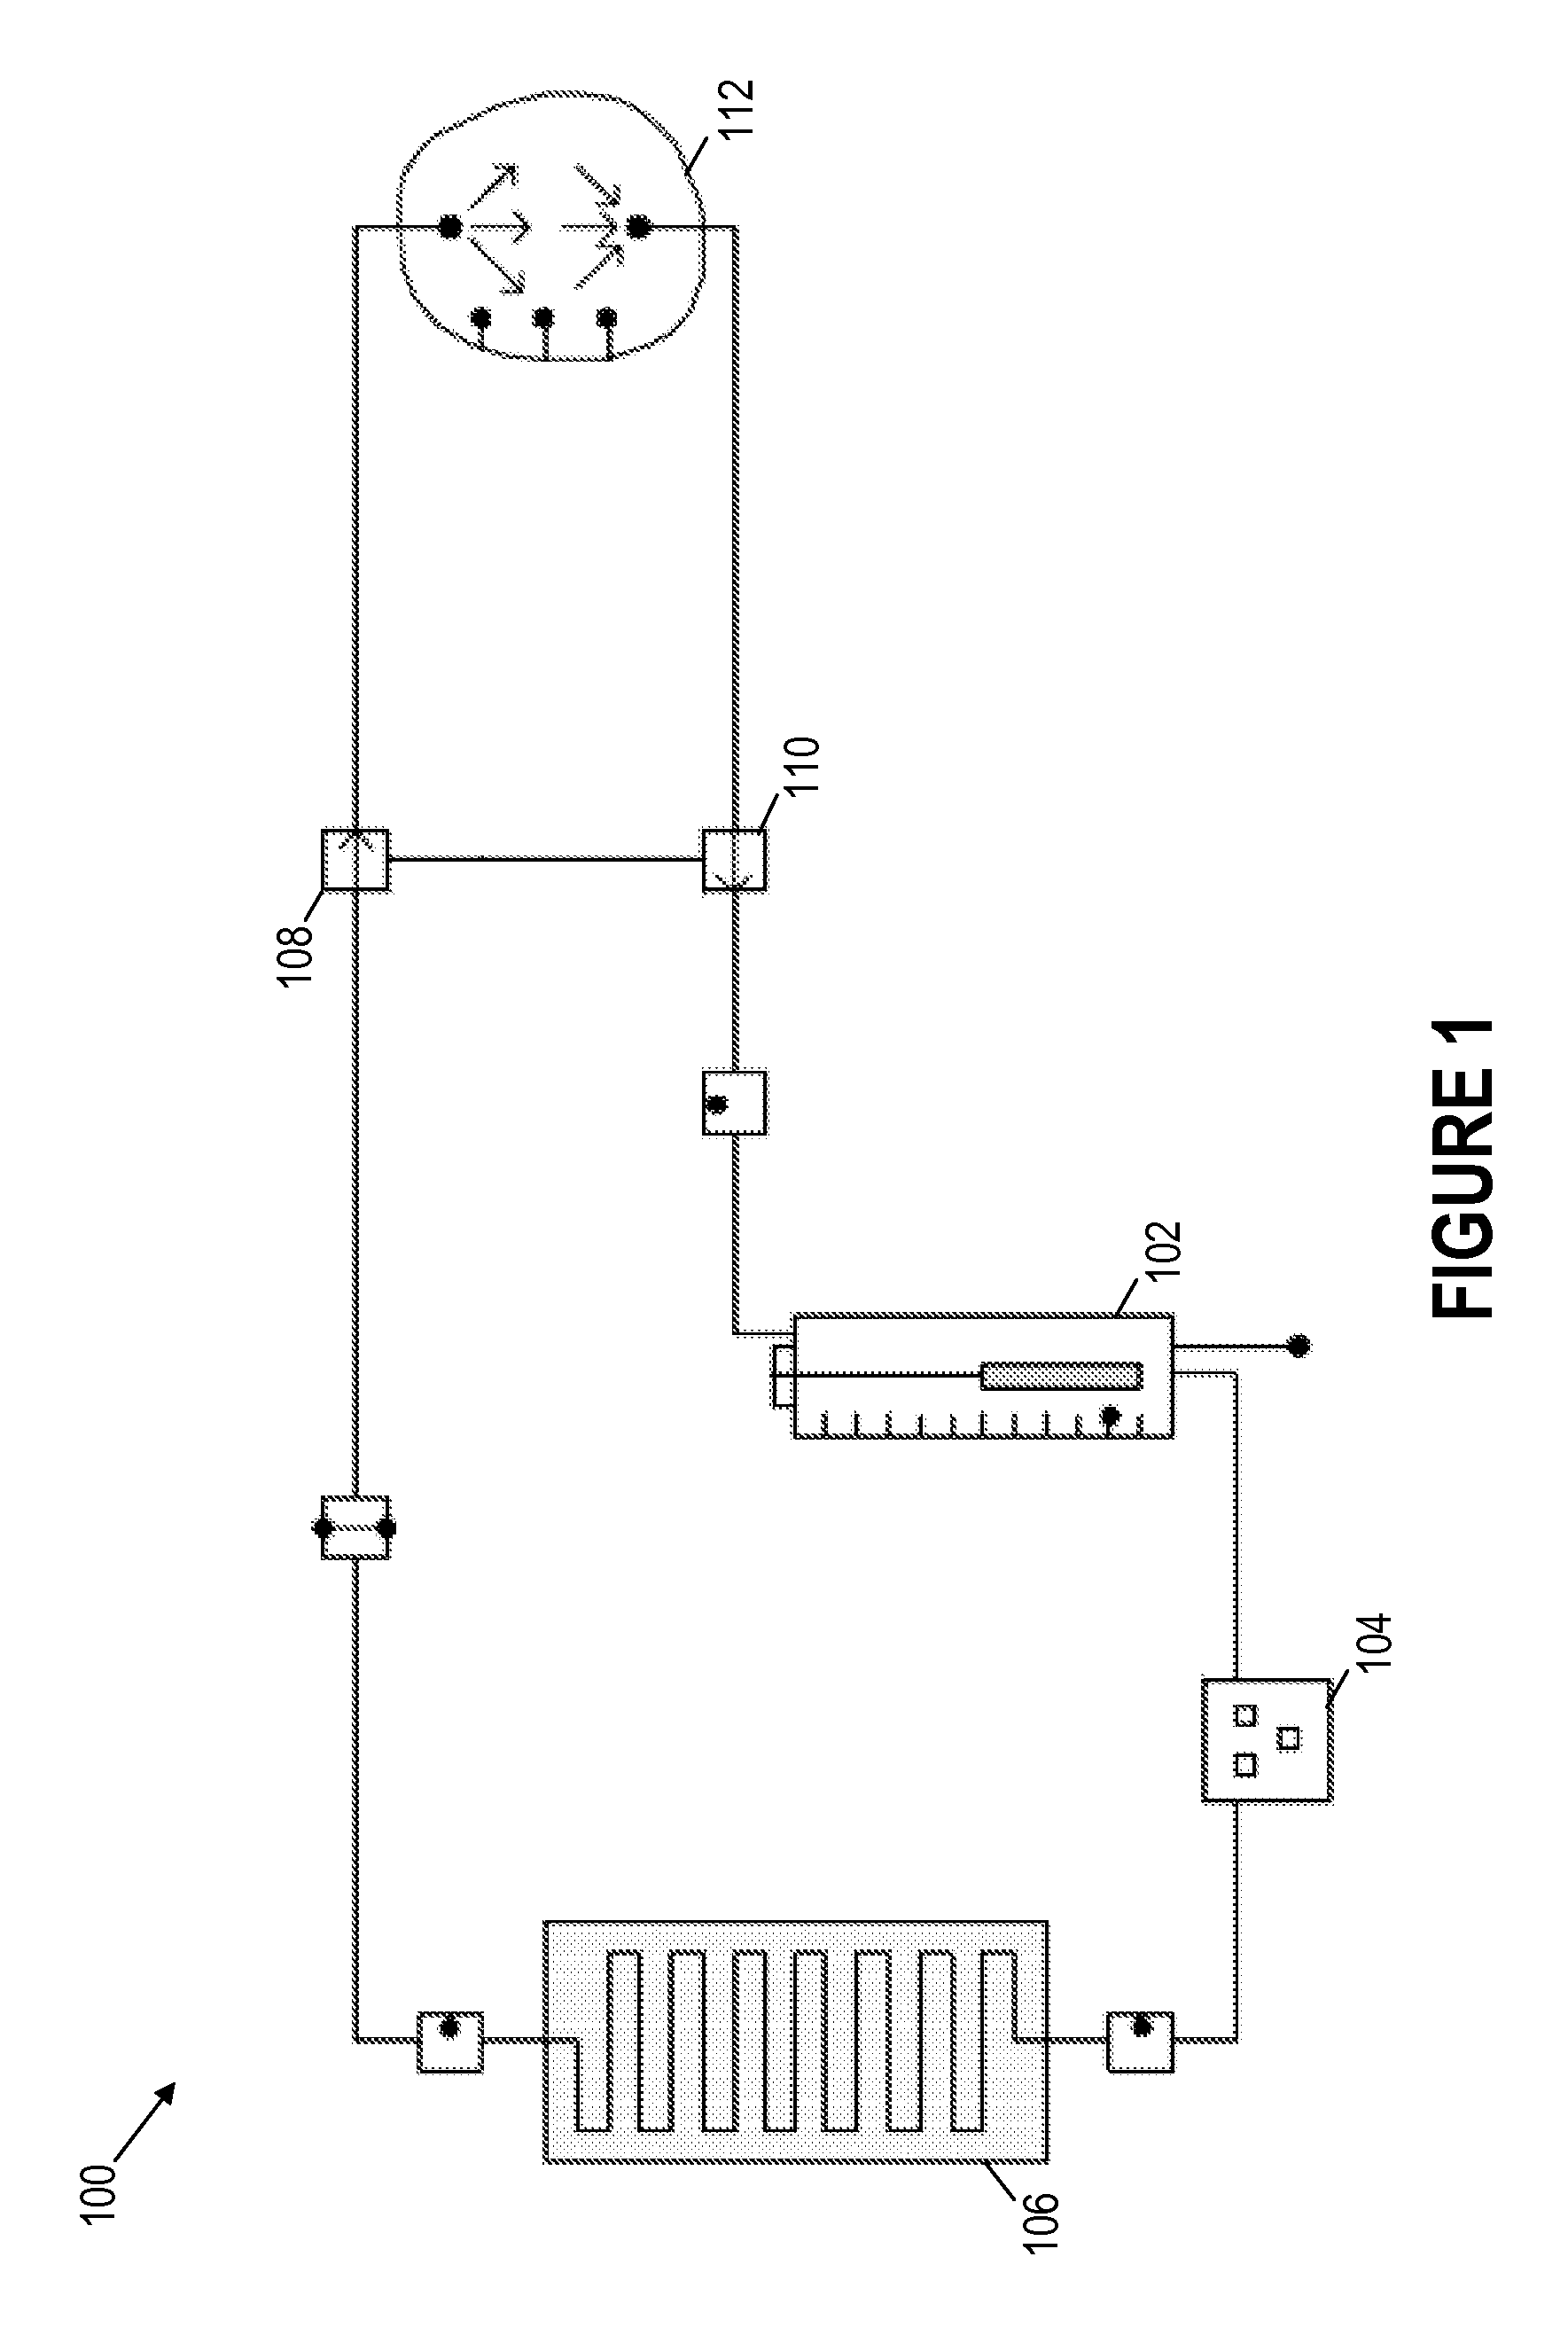 System and method for regulating the temperature of a fluid injected into a patient